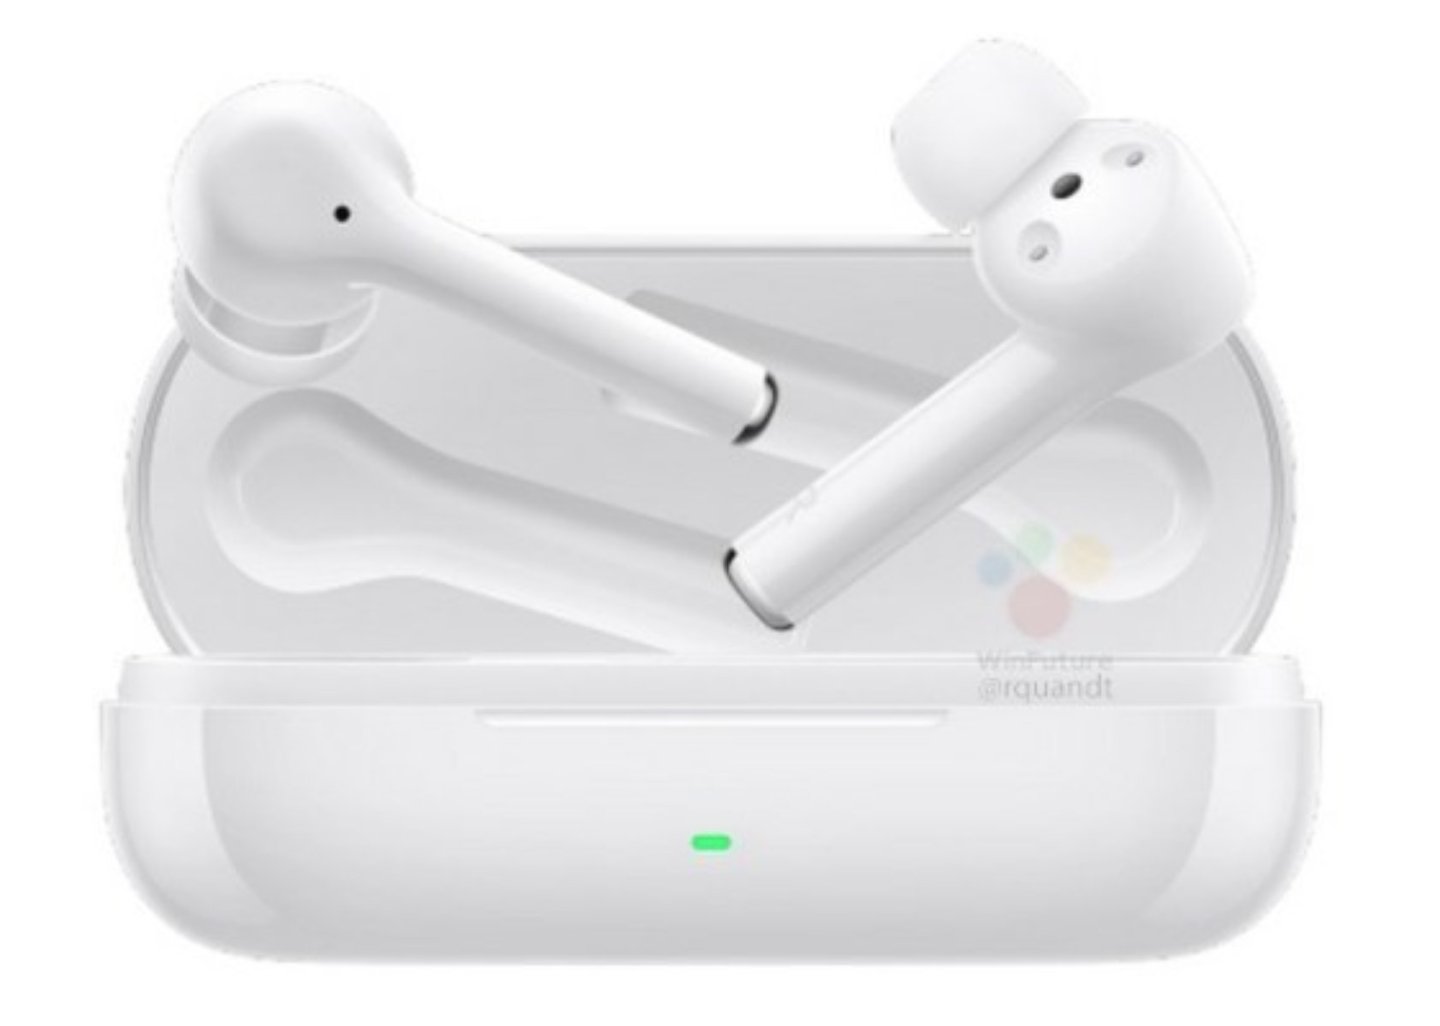 Huawei FreeBuds 3i: Apple AirPods Pro clones that come with 24 dB(A) ANC and Quick Pairing - NotebookCheck.net